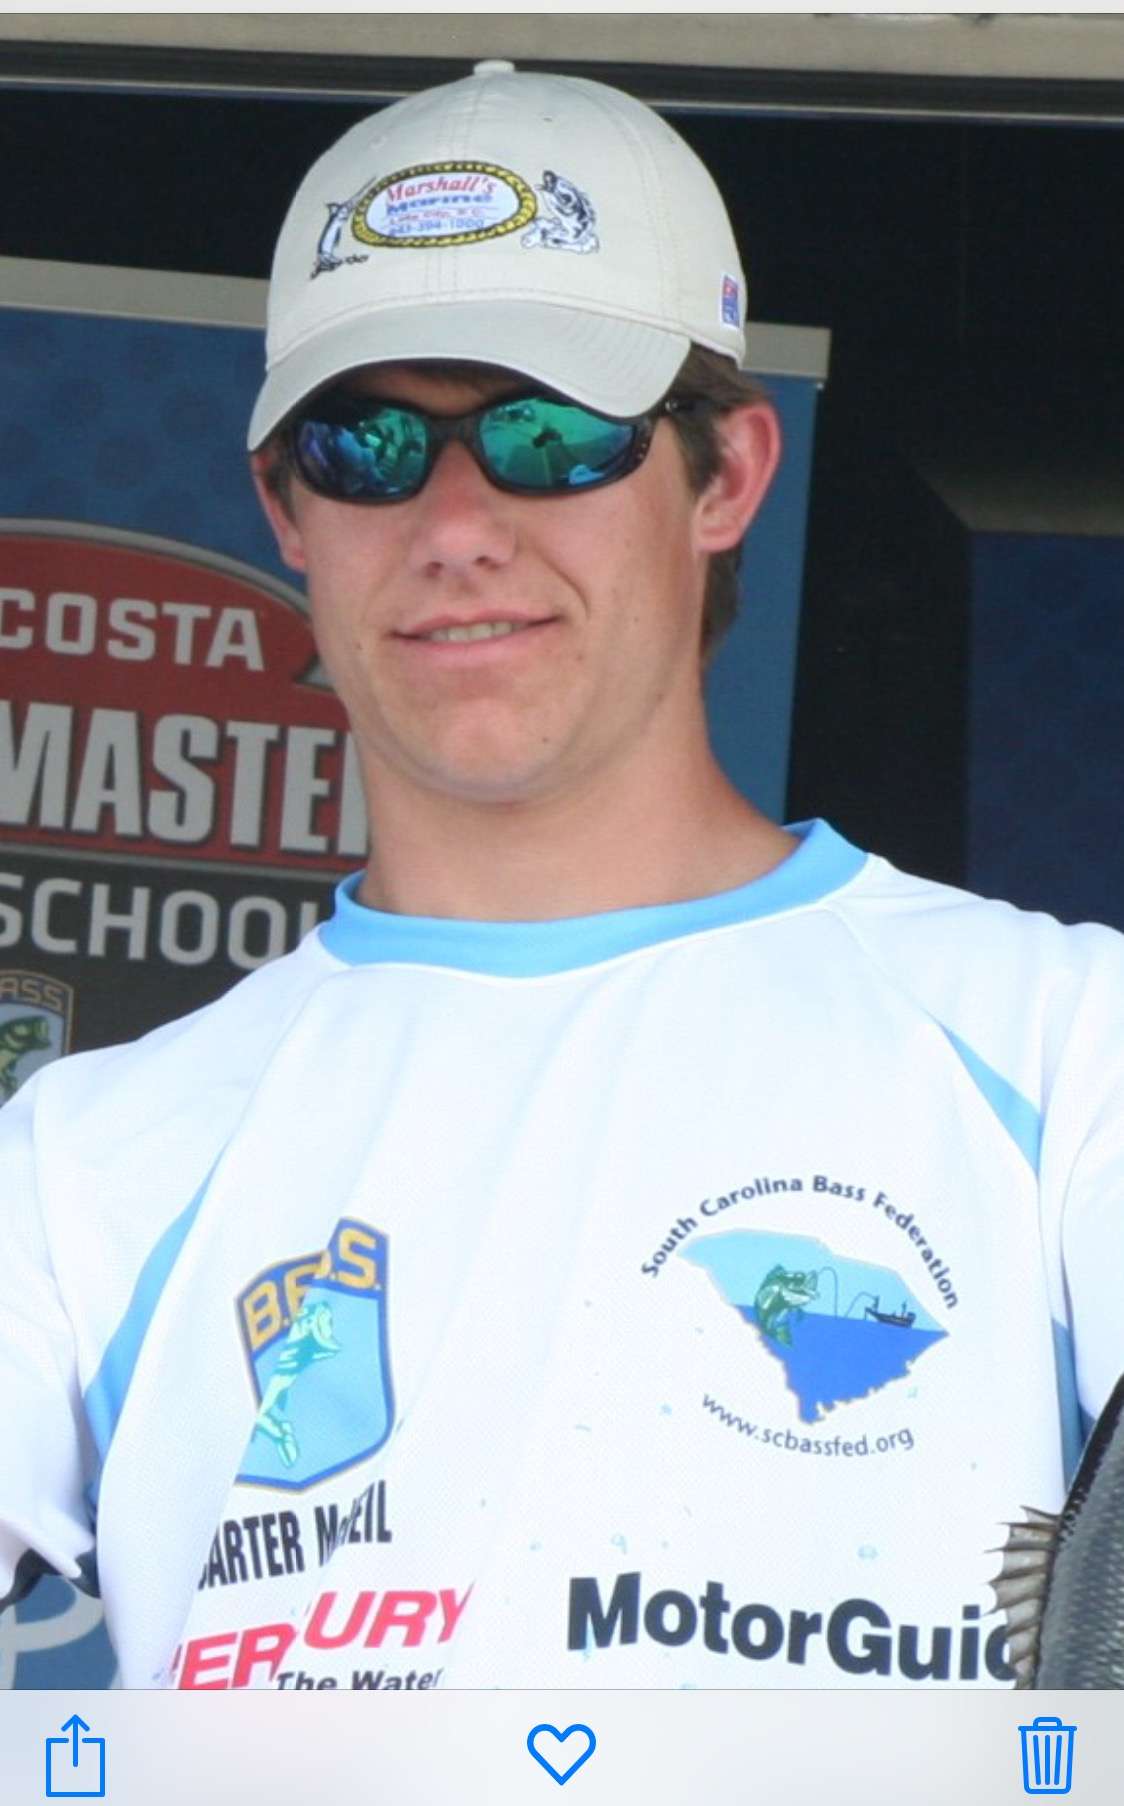 <p>South Carolina: Carter McNeil</p>
<p>
McNeil is a senior at Abbeville High School. He and his partner won the B.A.S.S. Nation High School Southern Divisional this month on the Pee Dee River and also took third place in the 2015 Costa Bassmaster High School Classic Exhibition. McNeil is the founder and president of his high school's fishing team.